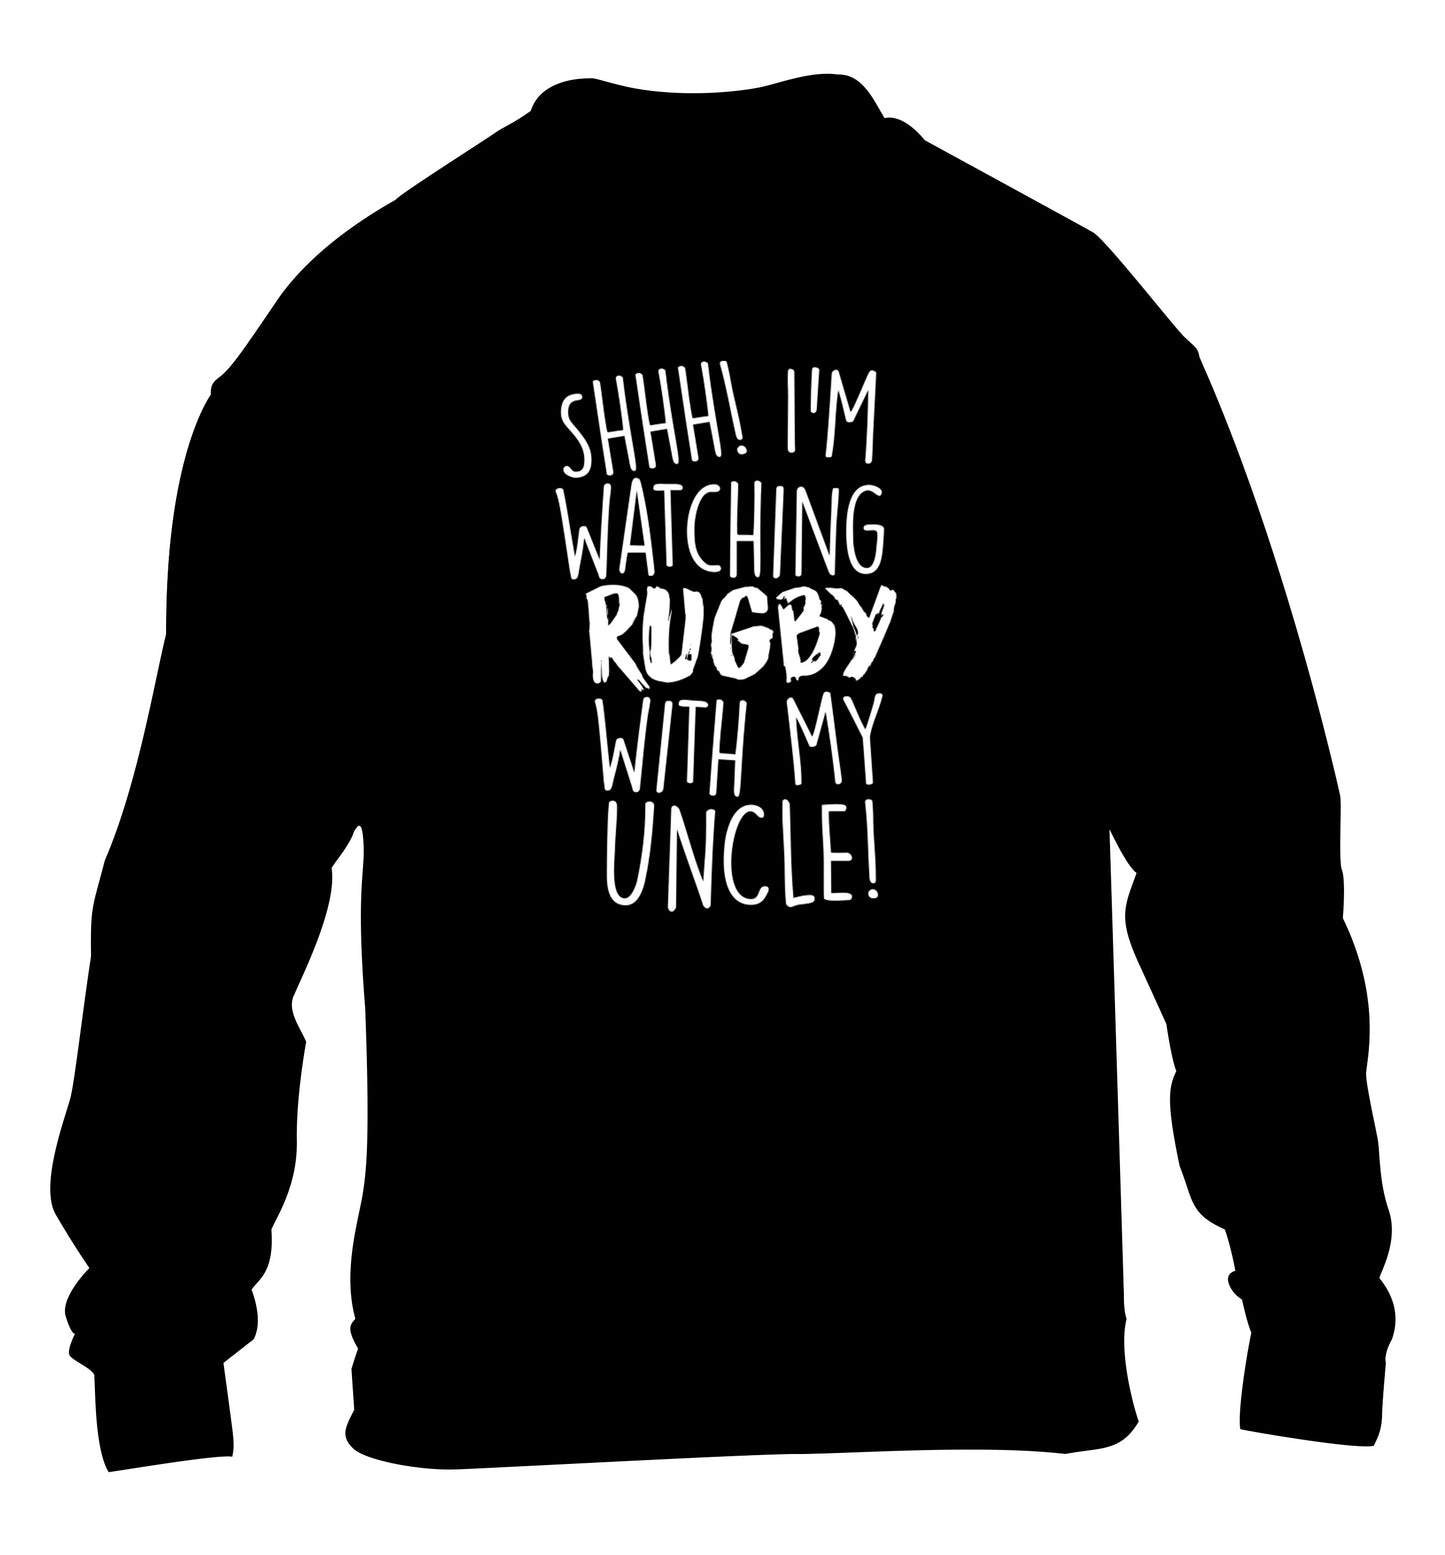 Shh.. I'm watching rugby with my uncle children's black sweater 12-13 Years